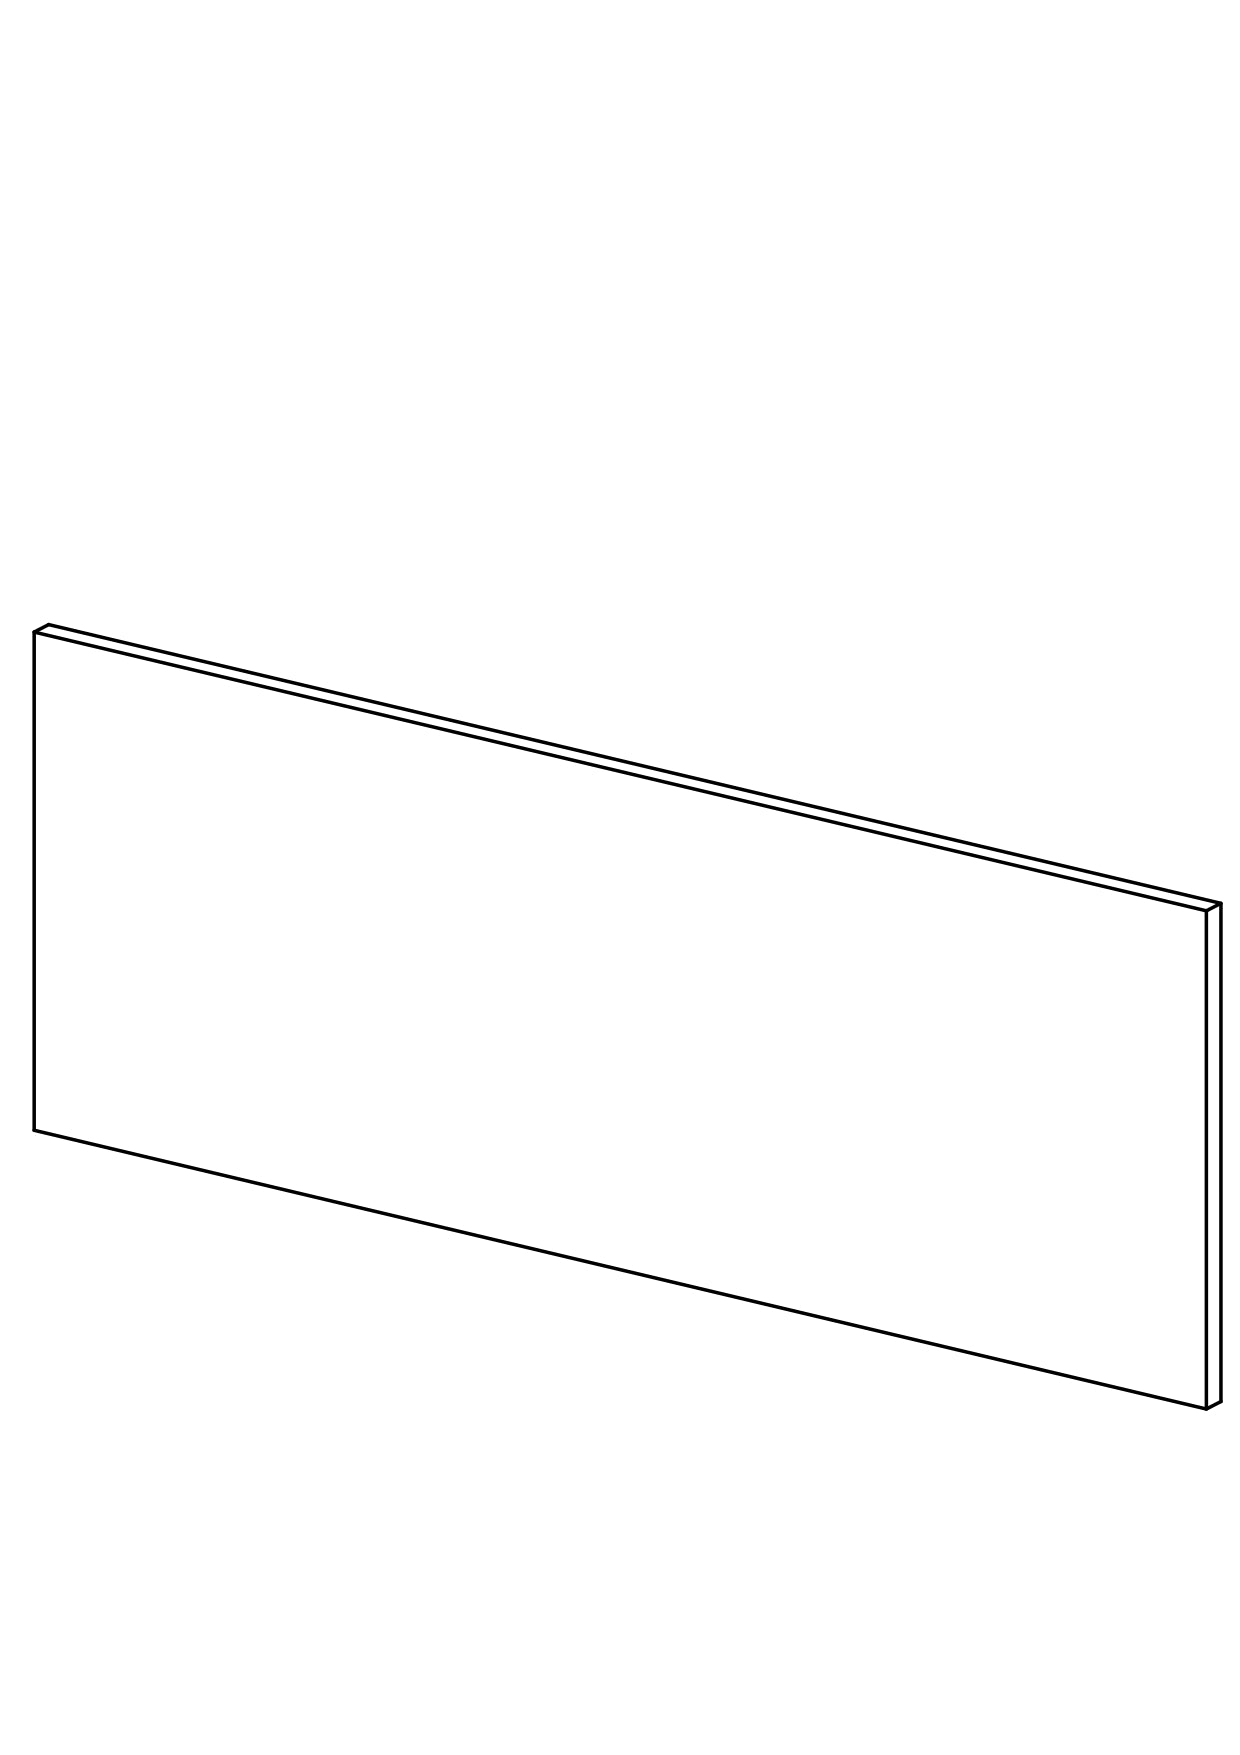 240x90 - Cover Panel - AbsoluteMatte - METOD